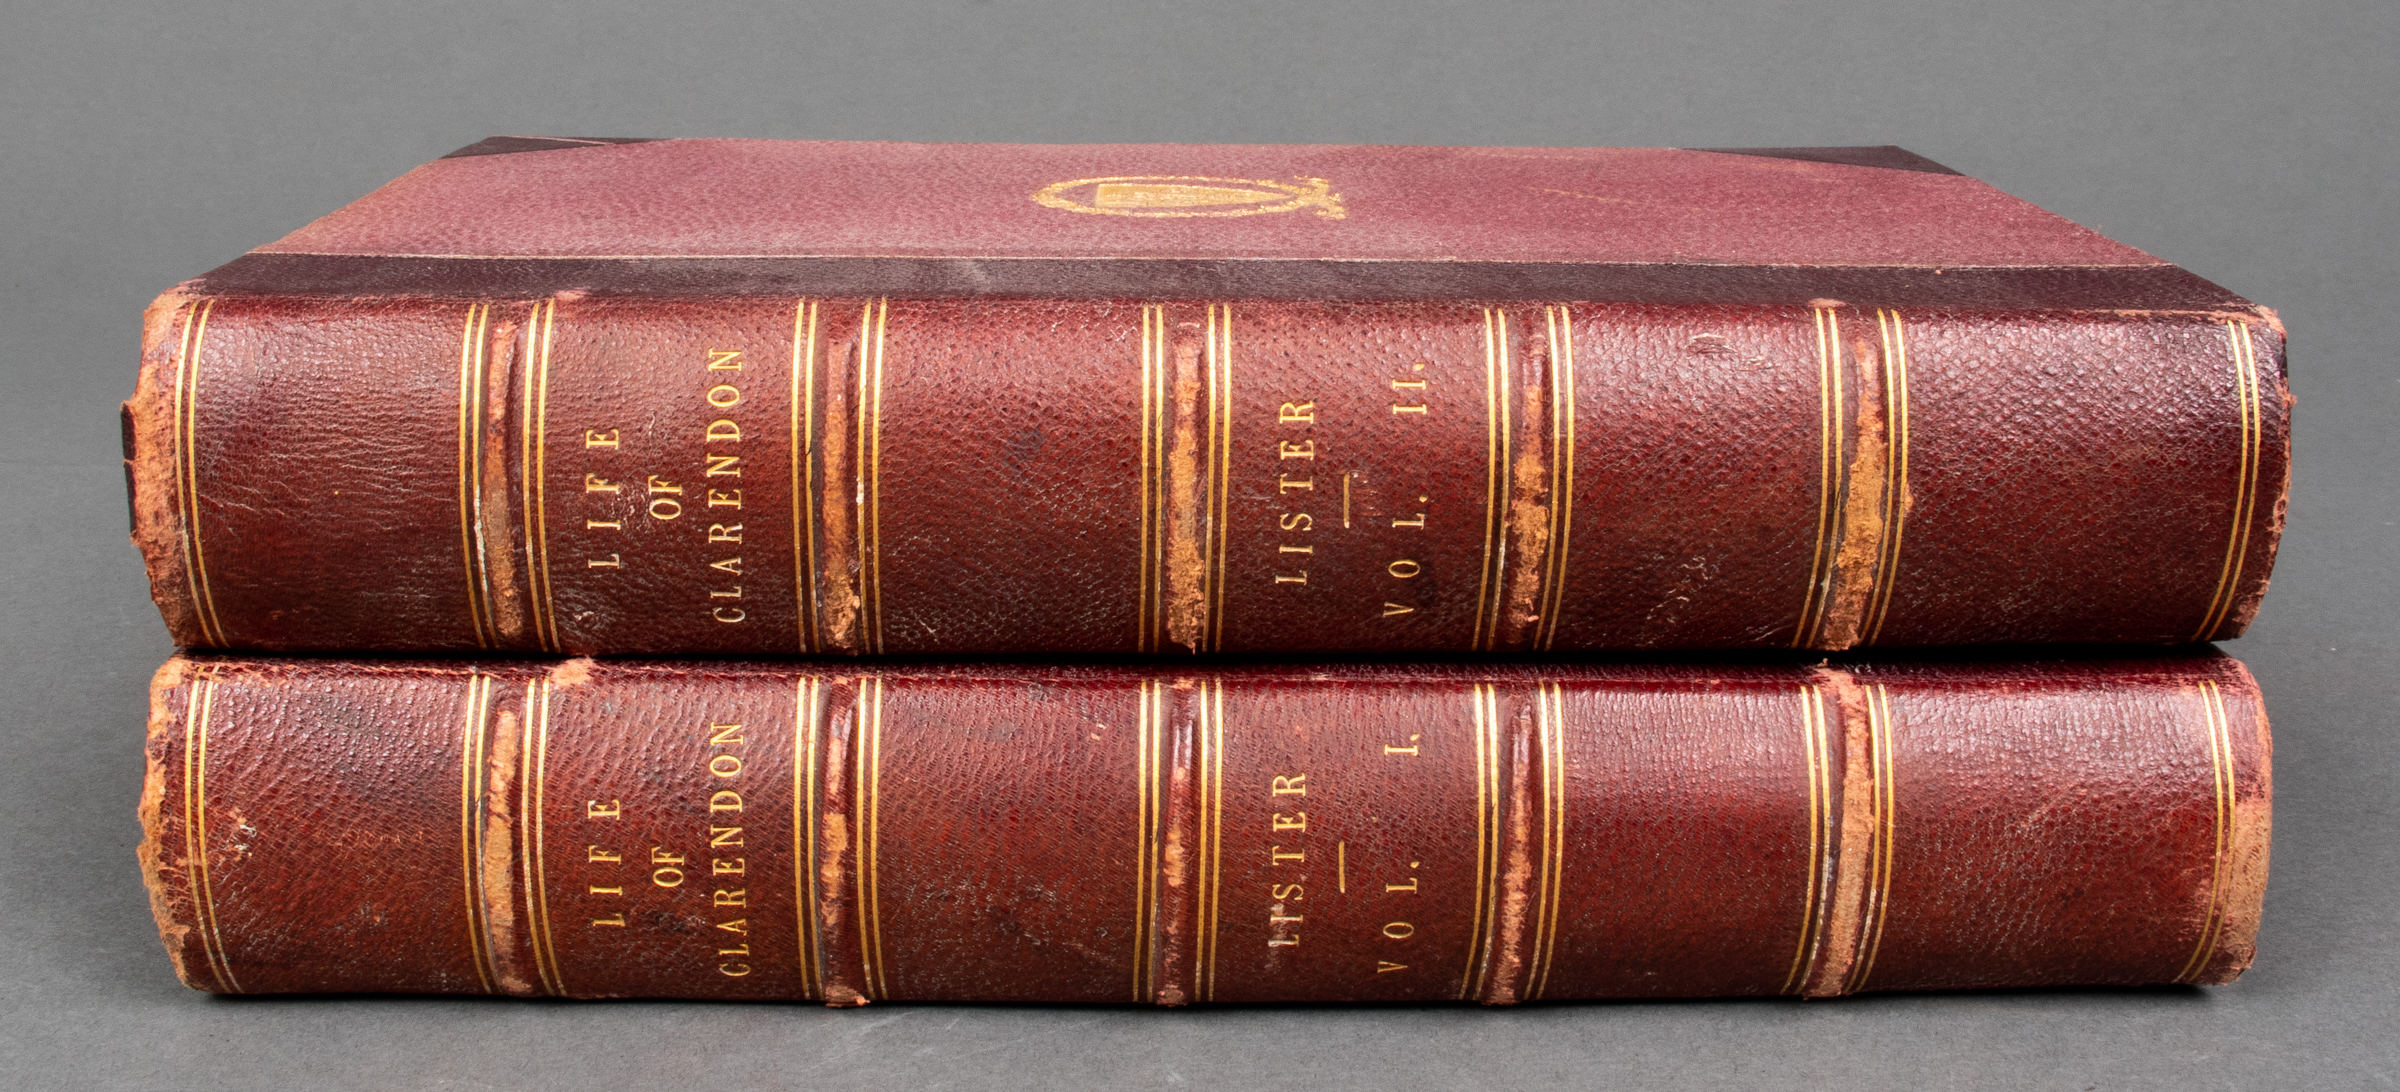 LISTER LIFE OF CLARENDON 2 VOLUMES 3c34b6